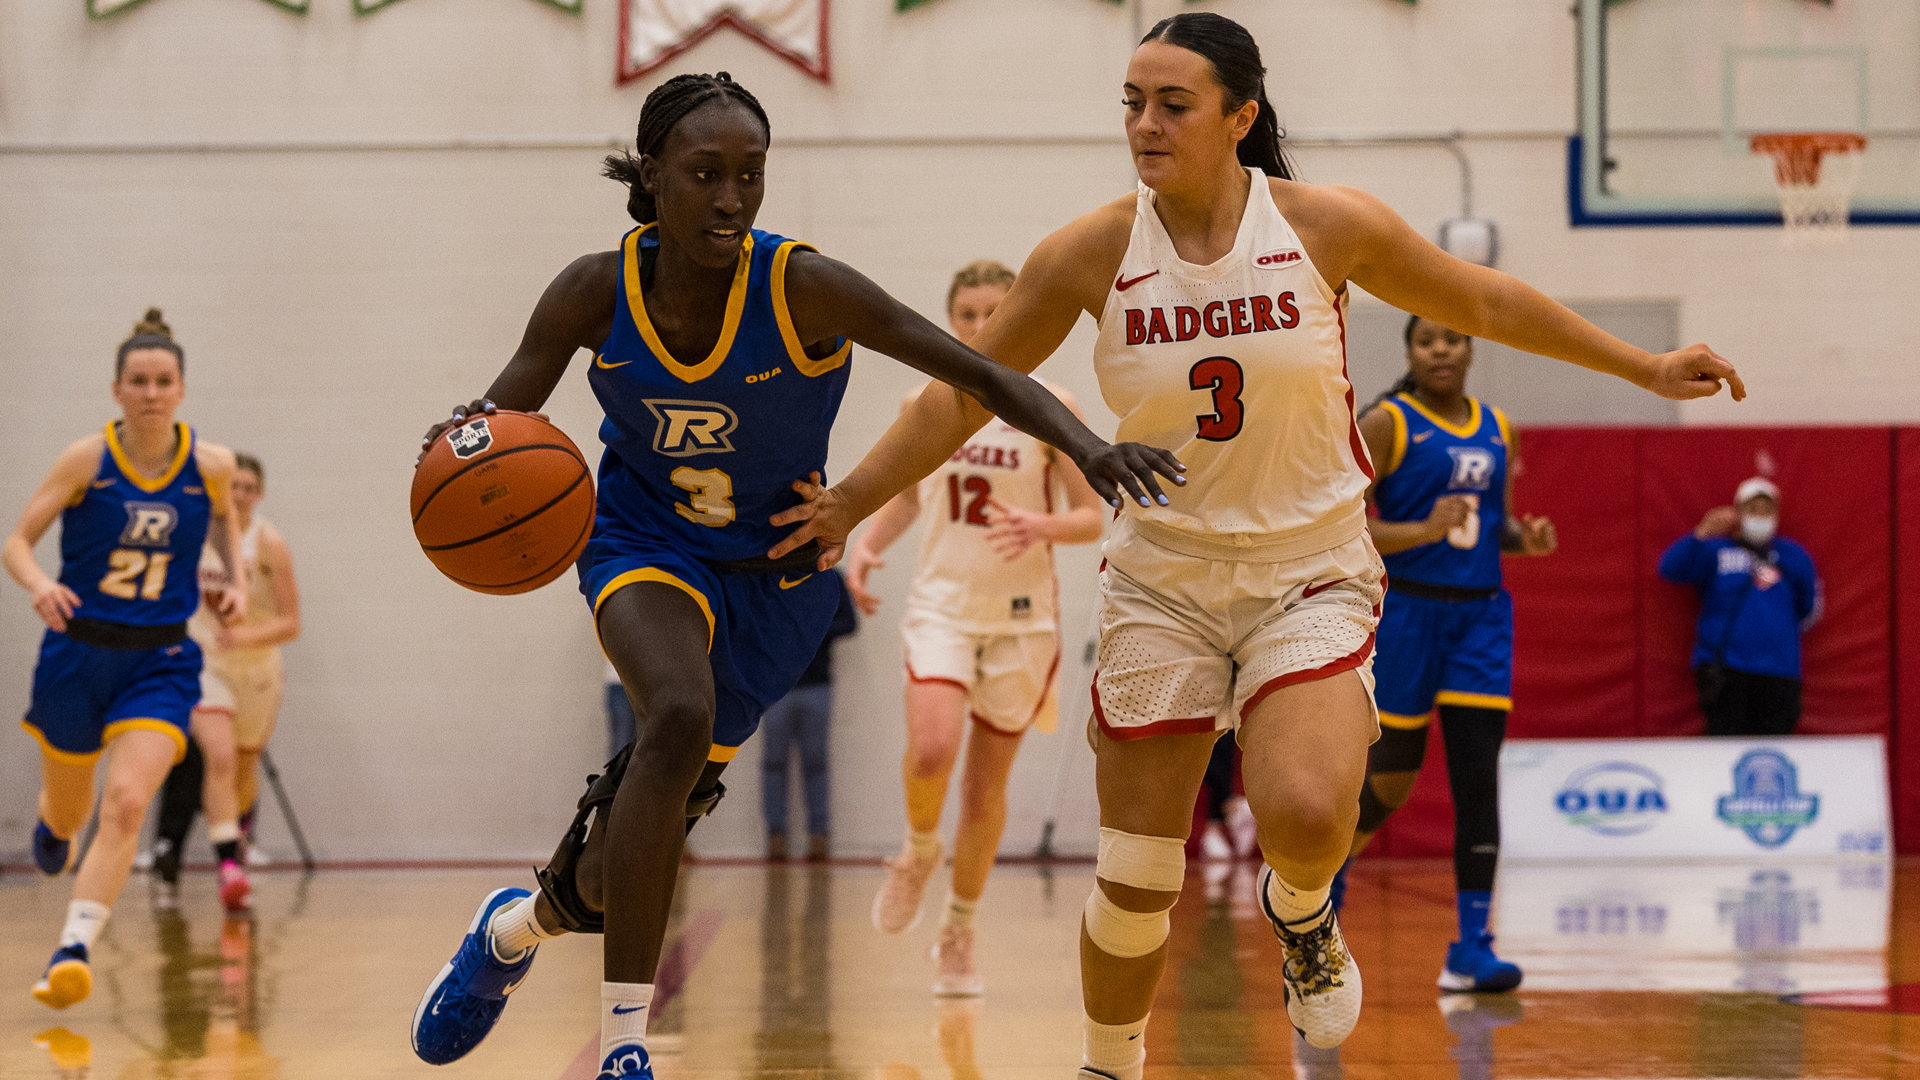 OUA announces women's and men's basketball schedules for the 2022-23 season